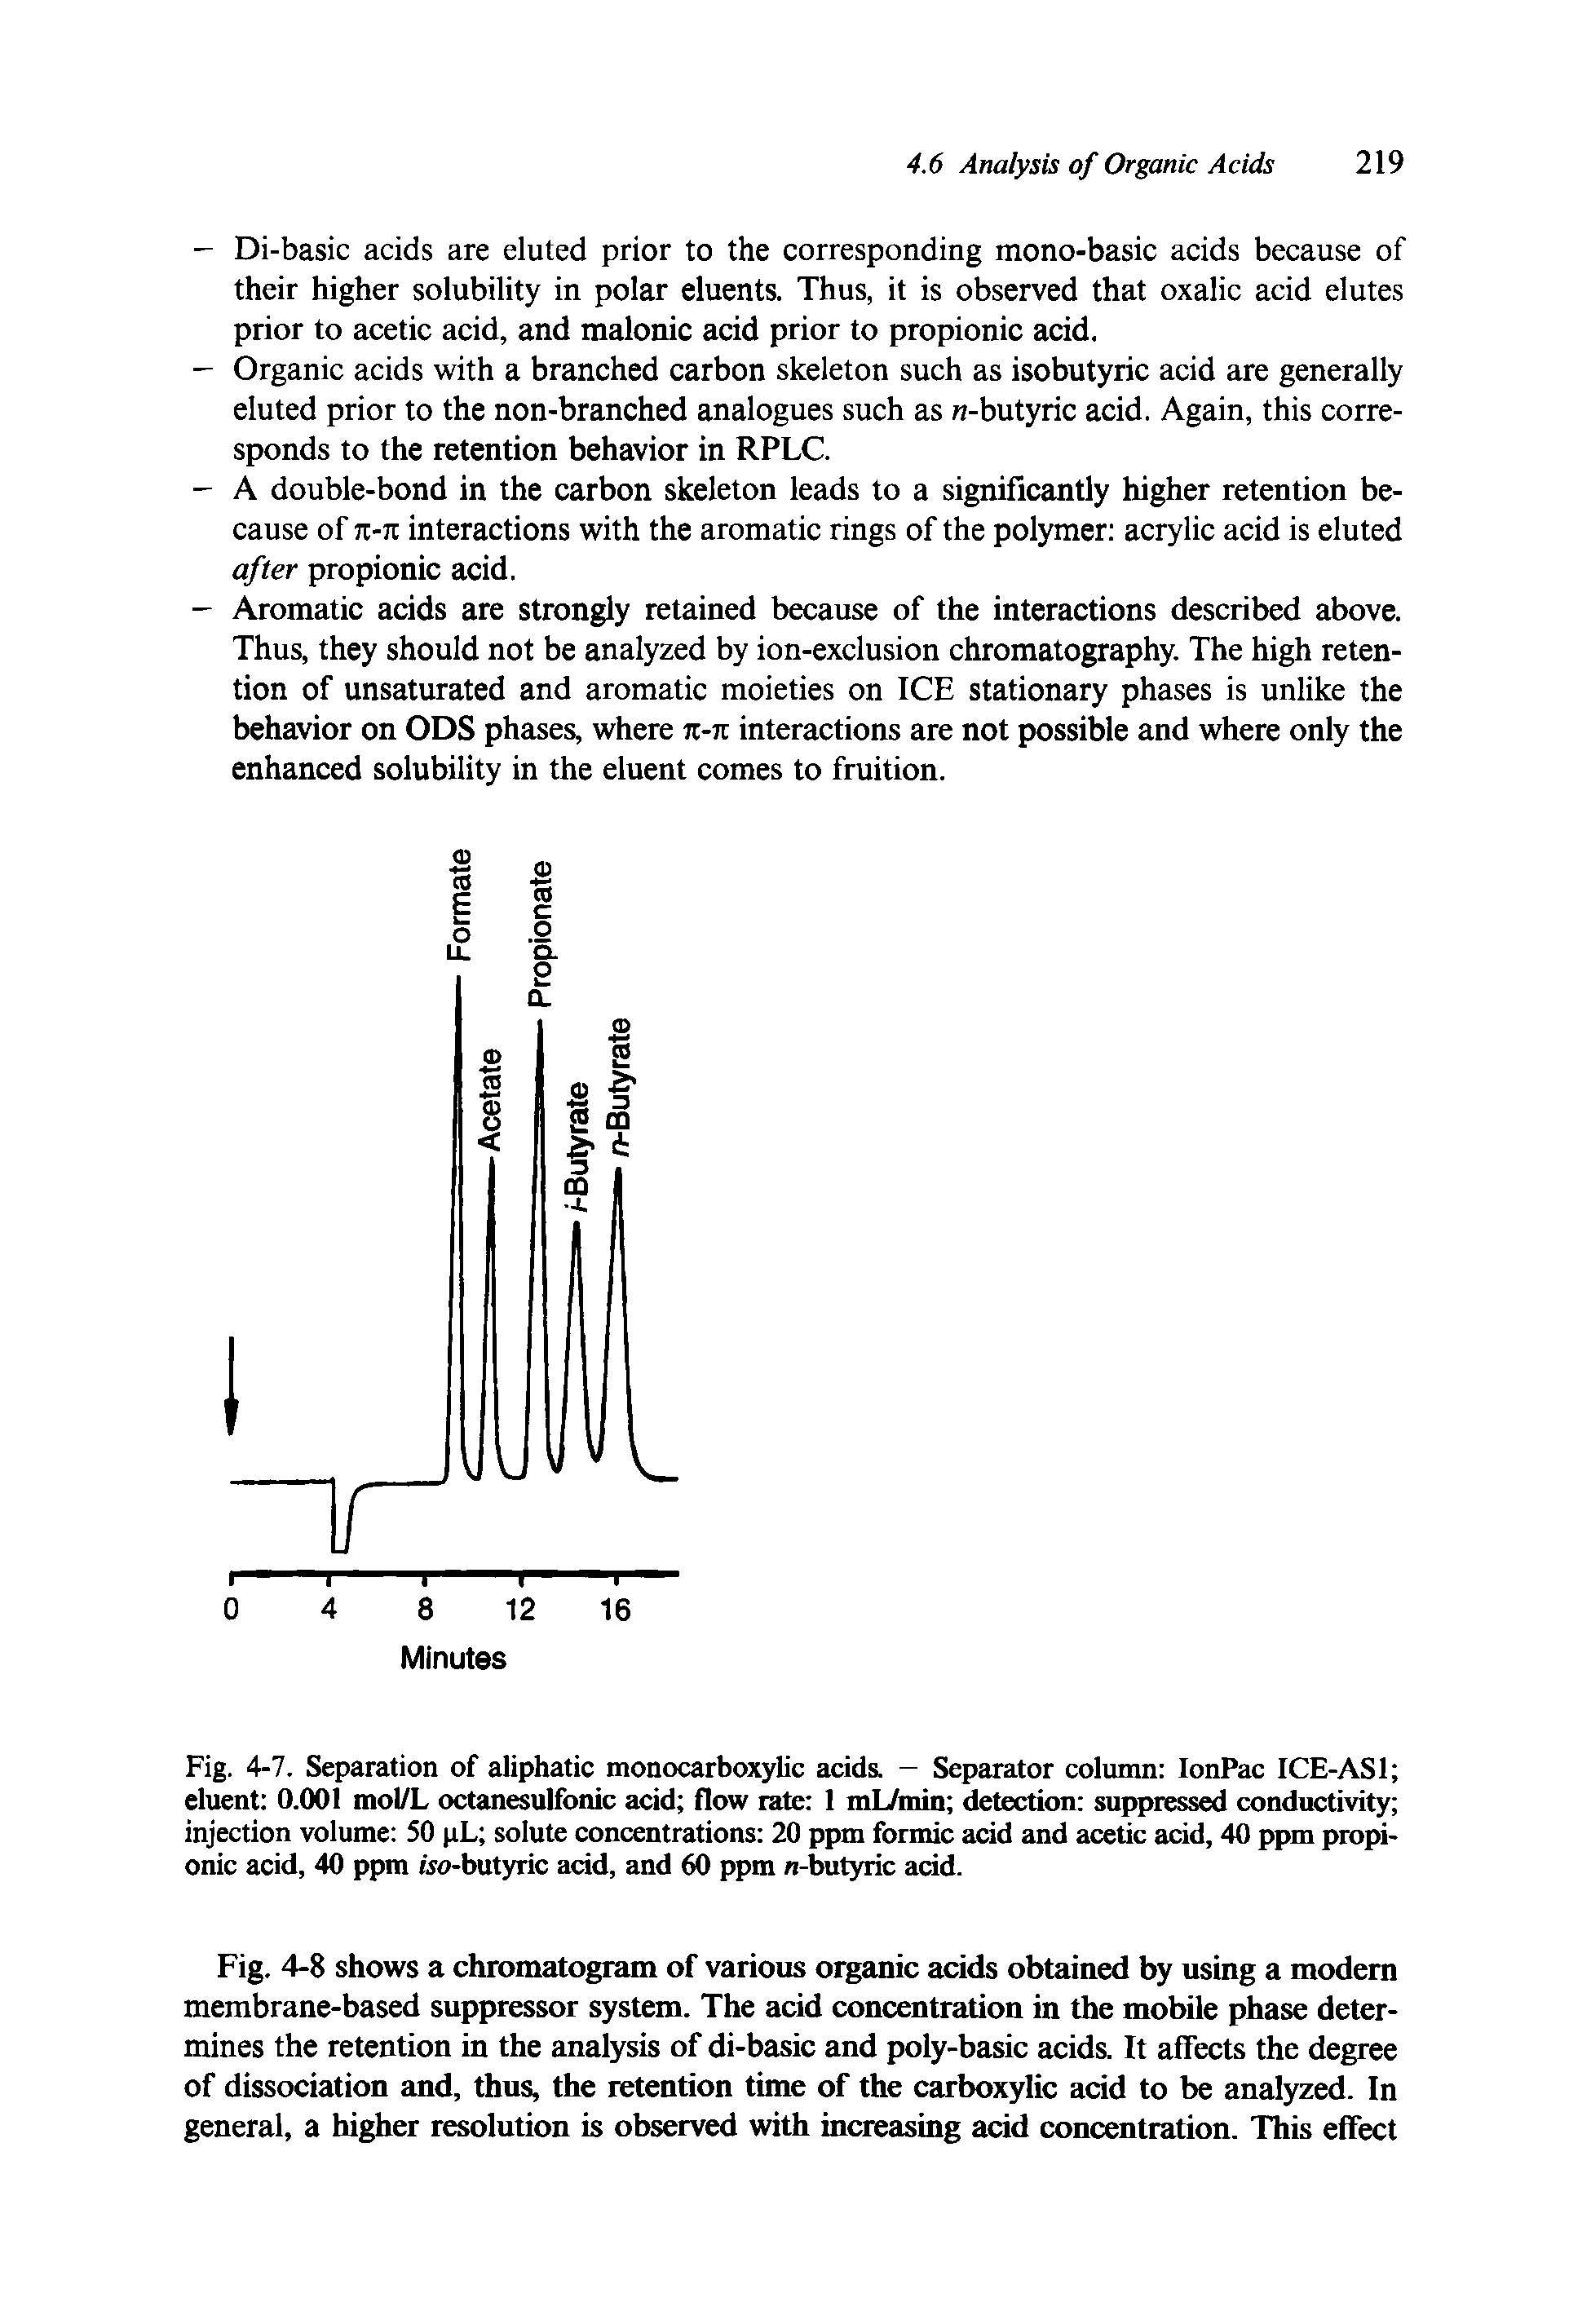 Fig. 4-7. Separation of aliphatic monocarboxylic acids. — Separator column IonPac ICE-AS1 eluent 0.001 mol/L octanesulfonic acid flow rate 1 mL/min detection suppressed conductivity injection volume 50 pL solute concentrations 20 ppm formic acid and acetic acid, 40 ppm propionic acid, 40 ppm wo-butyric acid, and 60 ppm n-butyric add.